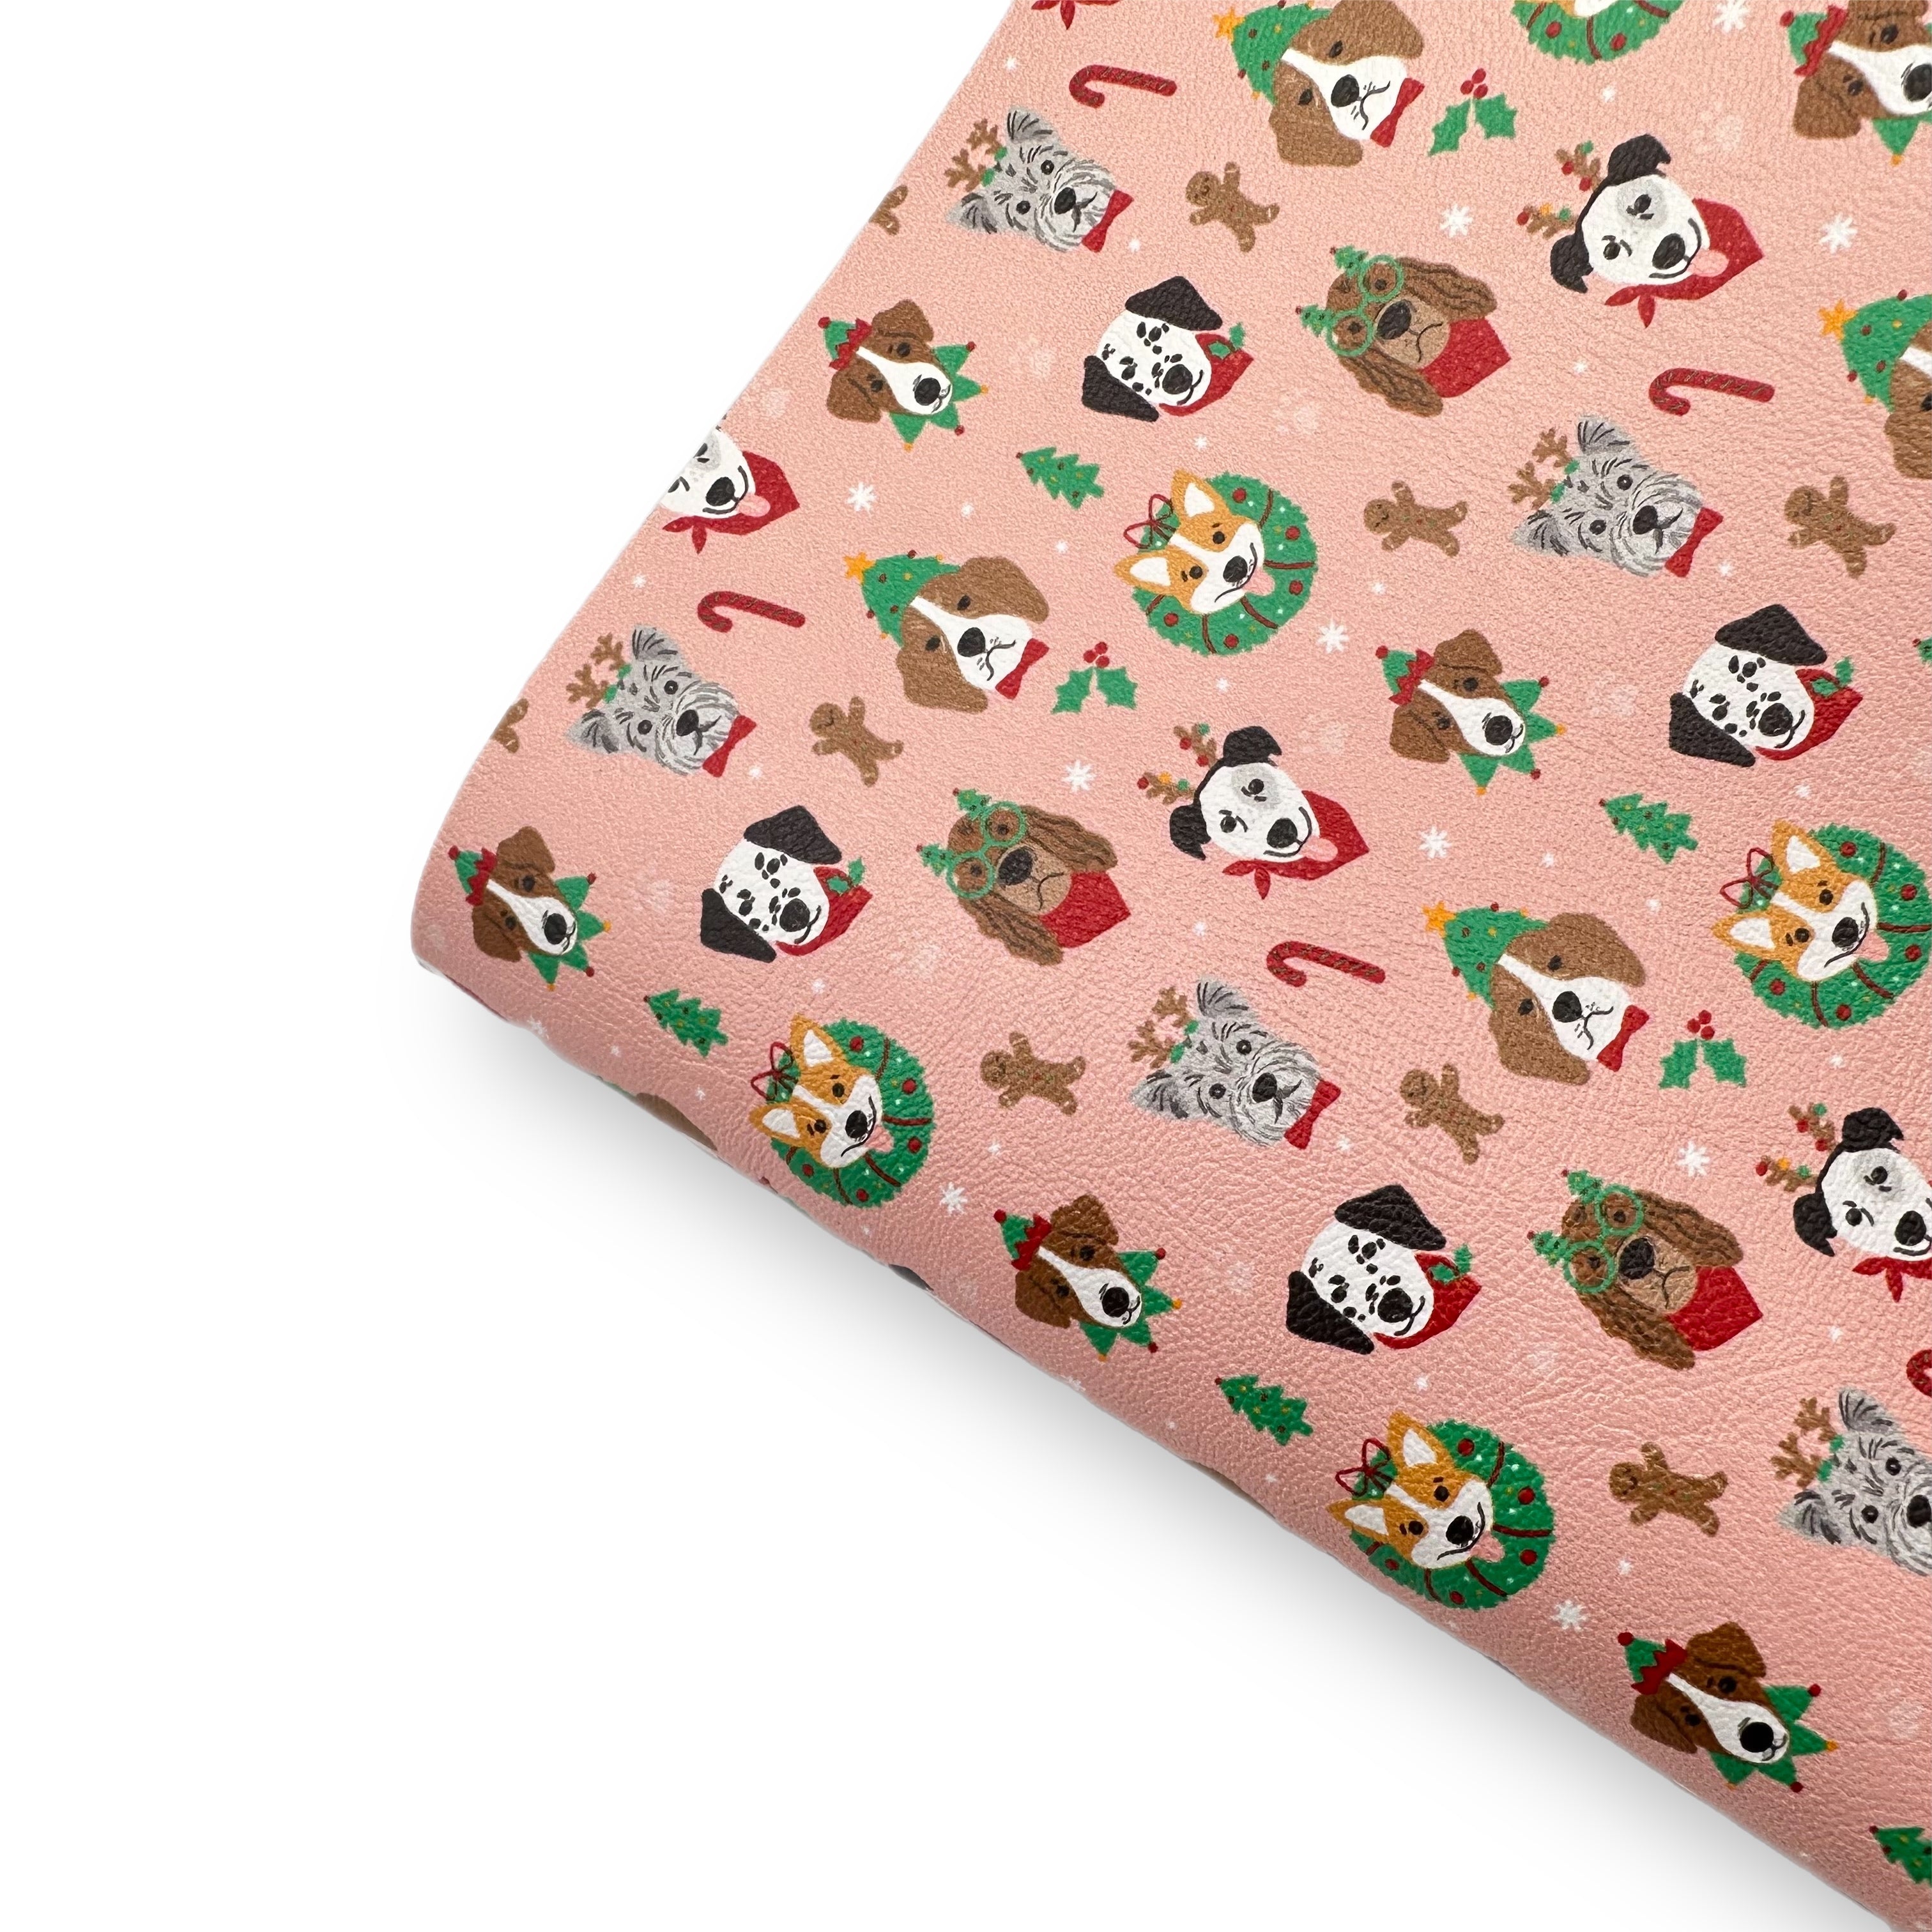 Pup's Christmas Party Premium Faux Leather Fabric Sheets